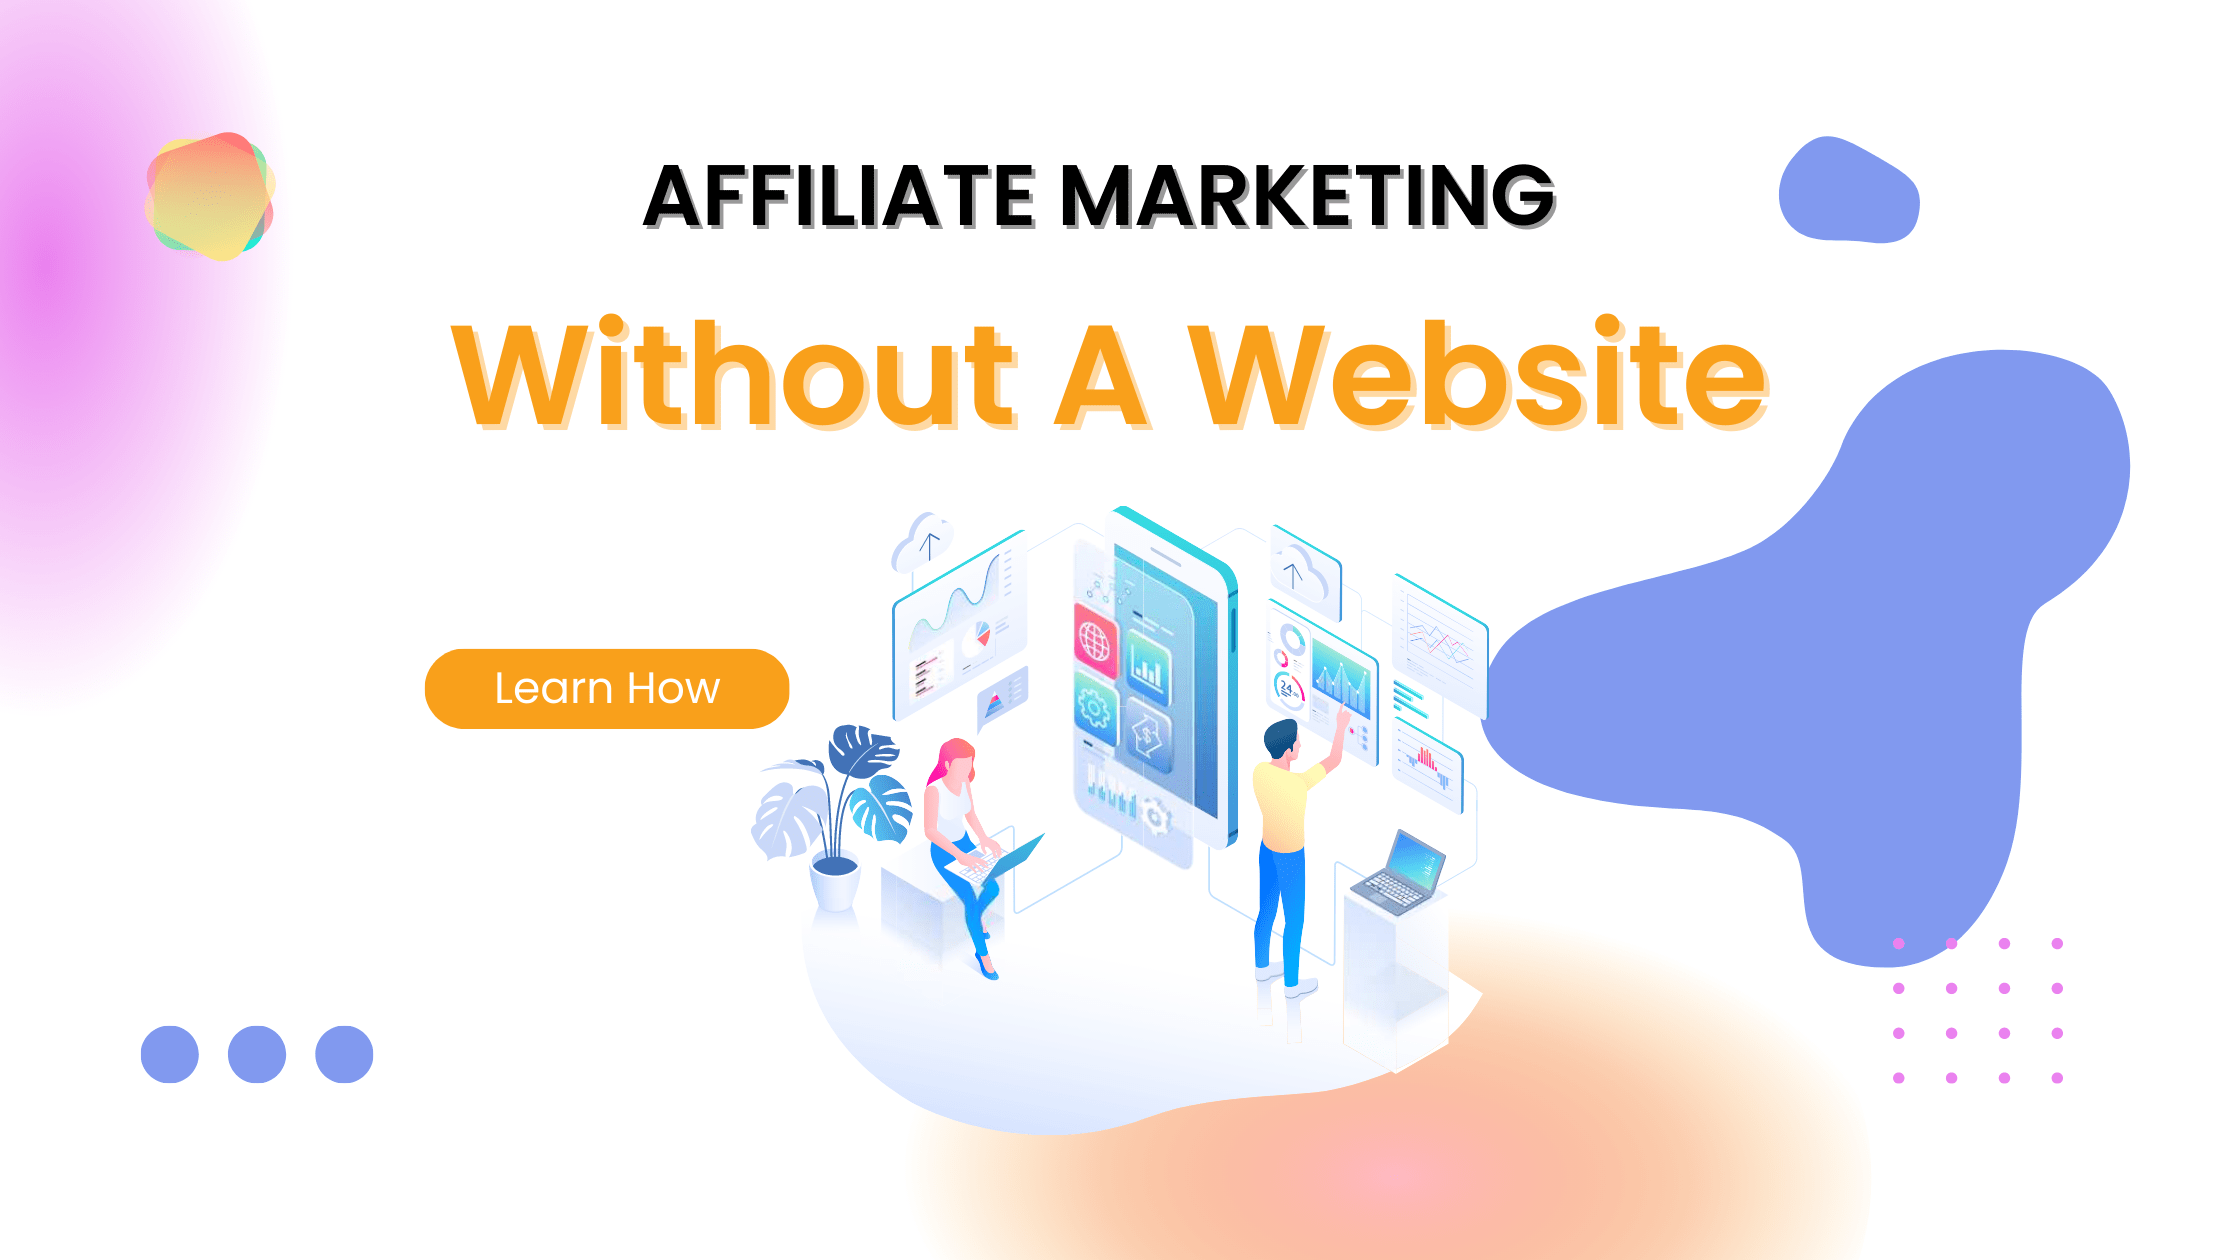 How To Do Affiliate Marketing Without A Website